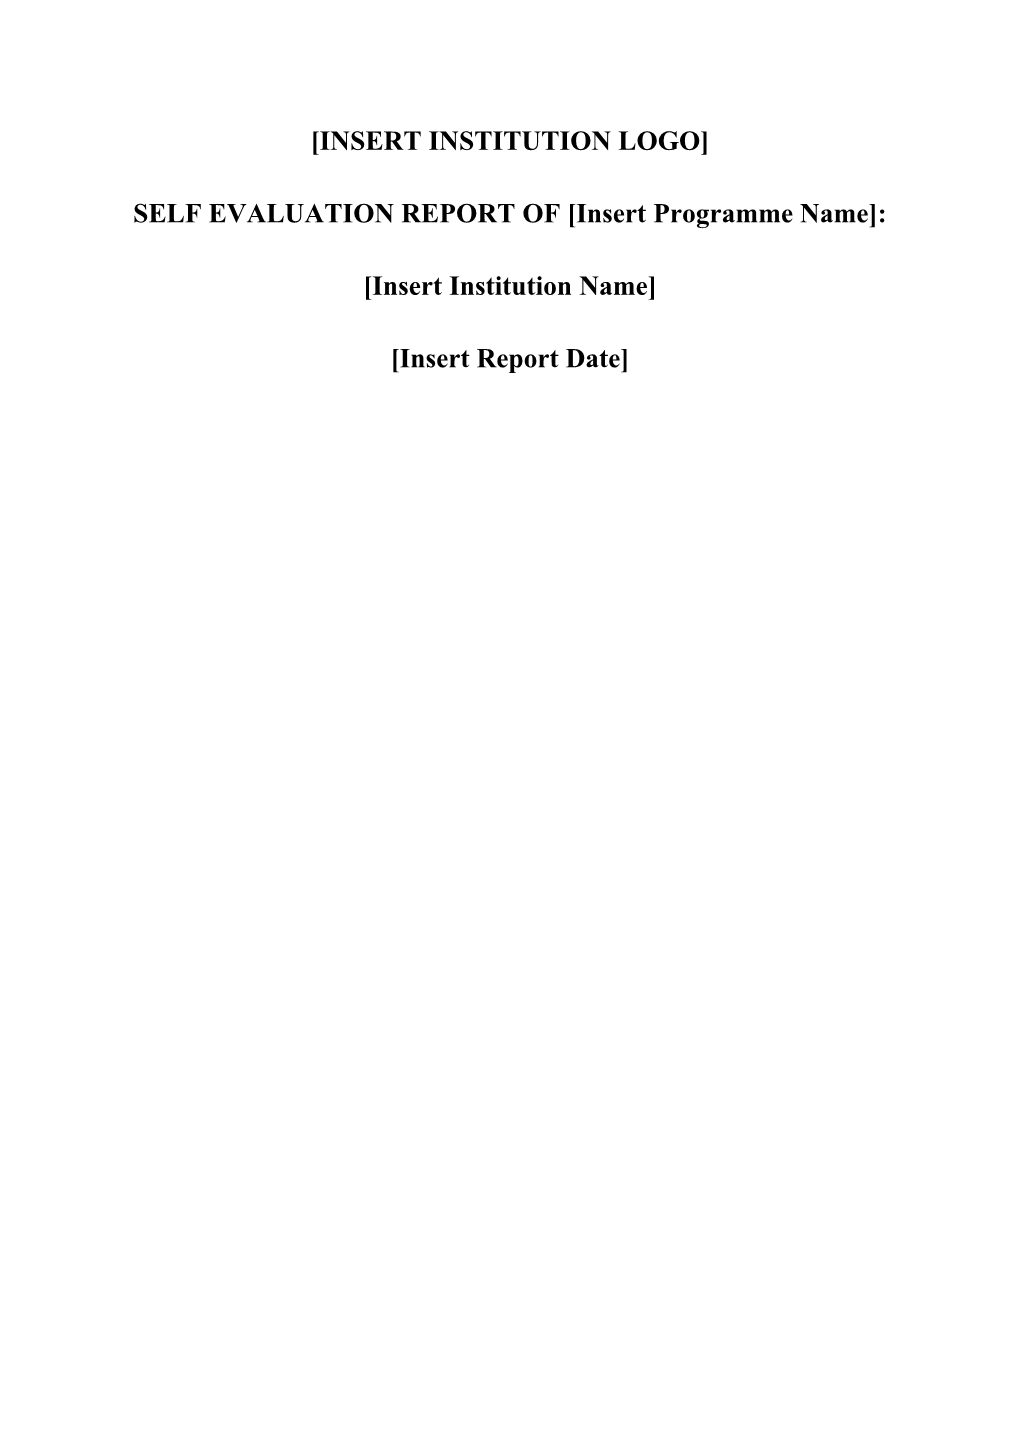 SELF EVALUATION REPORT of Insert Programme Name